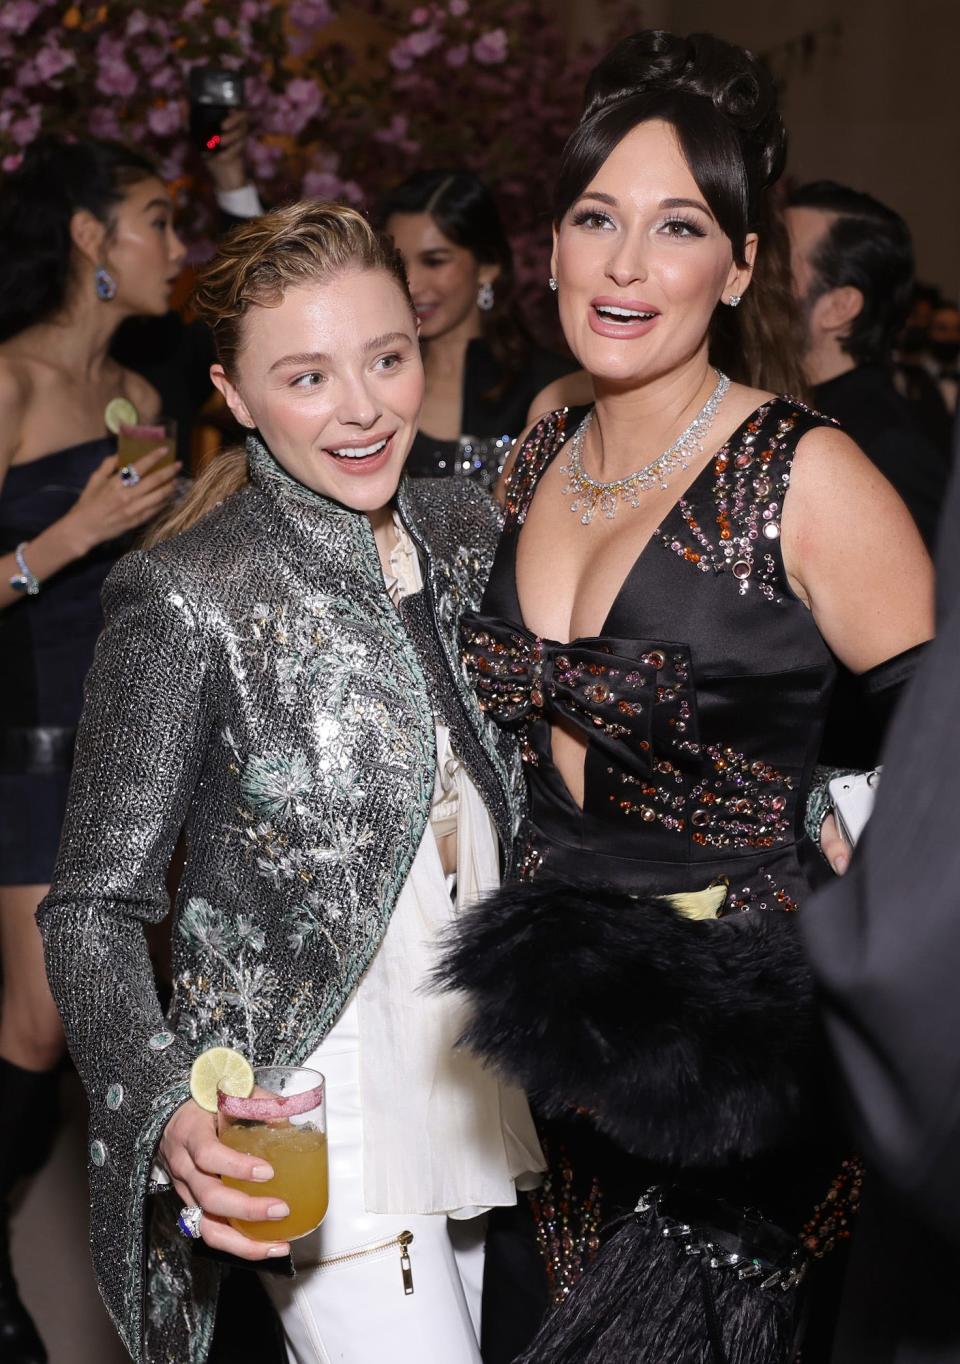 Chloë Grace Moretz and Kacey Musgraves hug at the Met Gala on May 2, 2022.